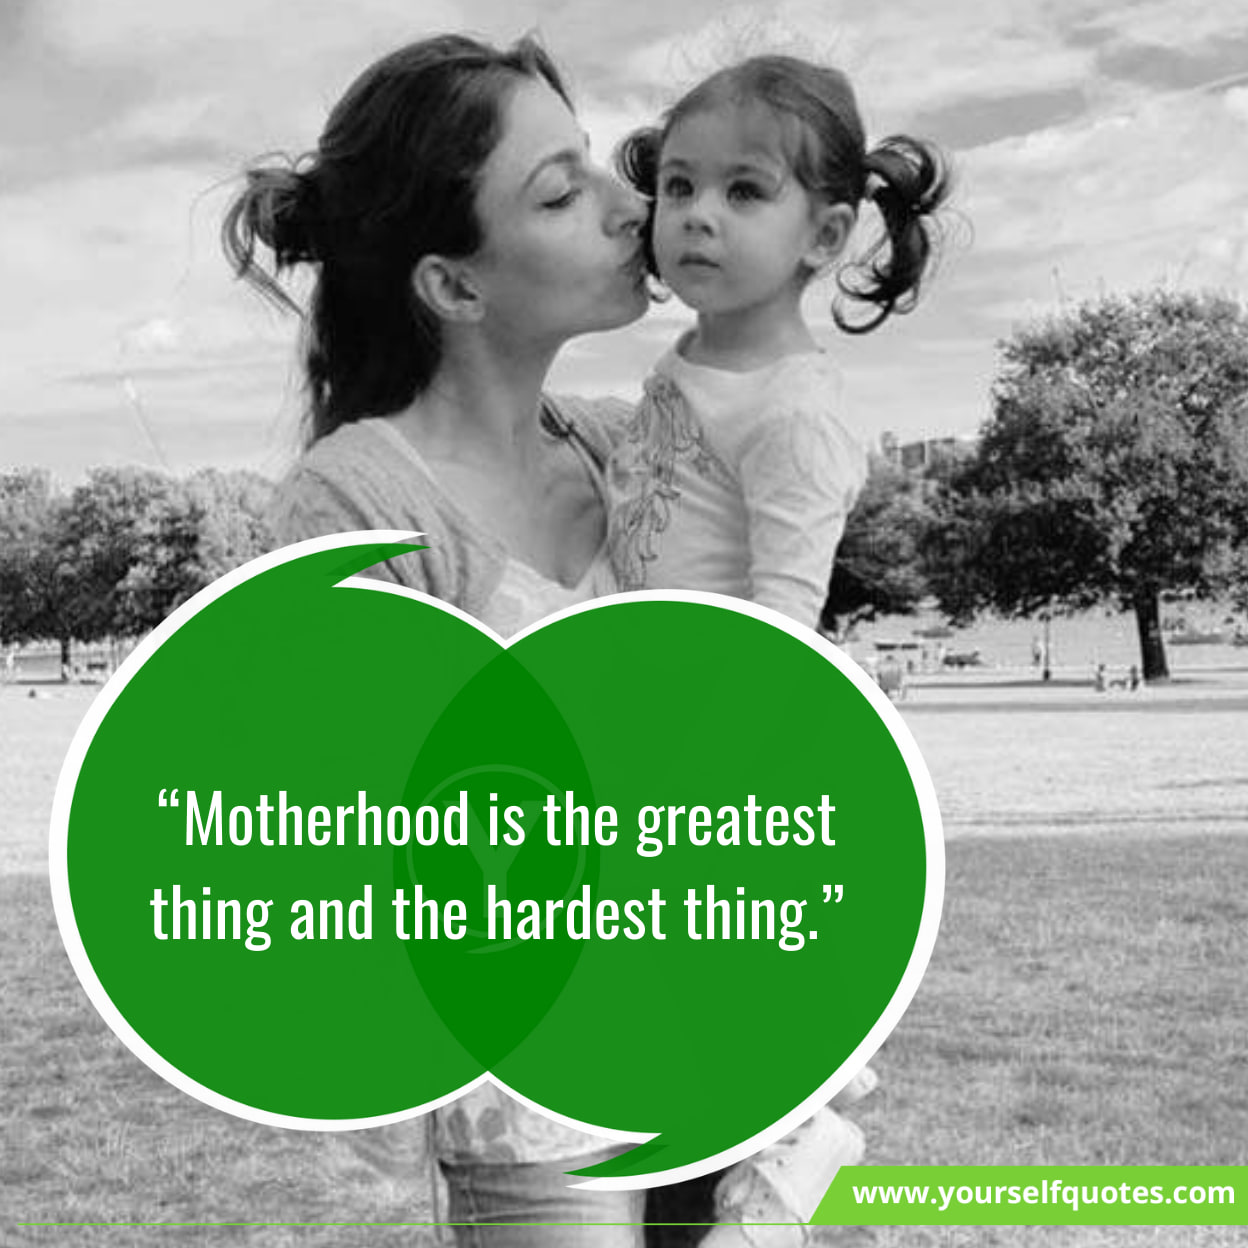 Mother-Daughter Quotes On Motherhood